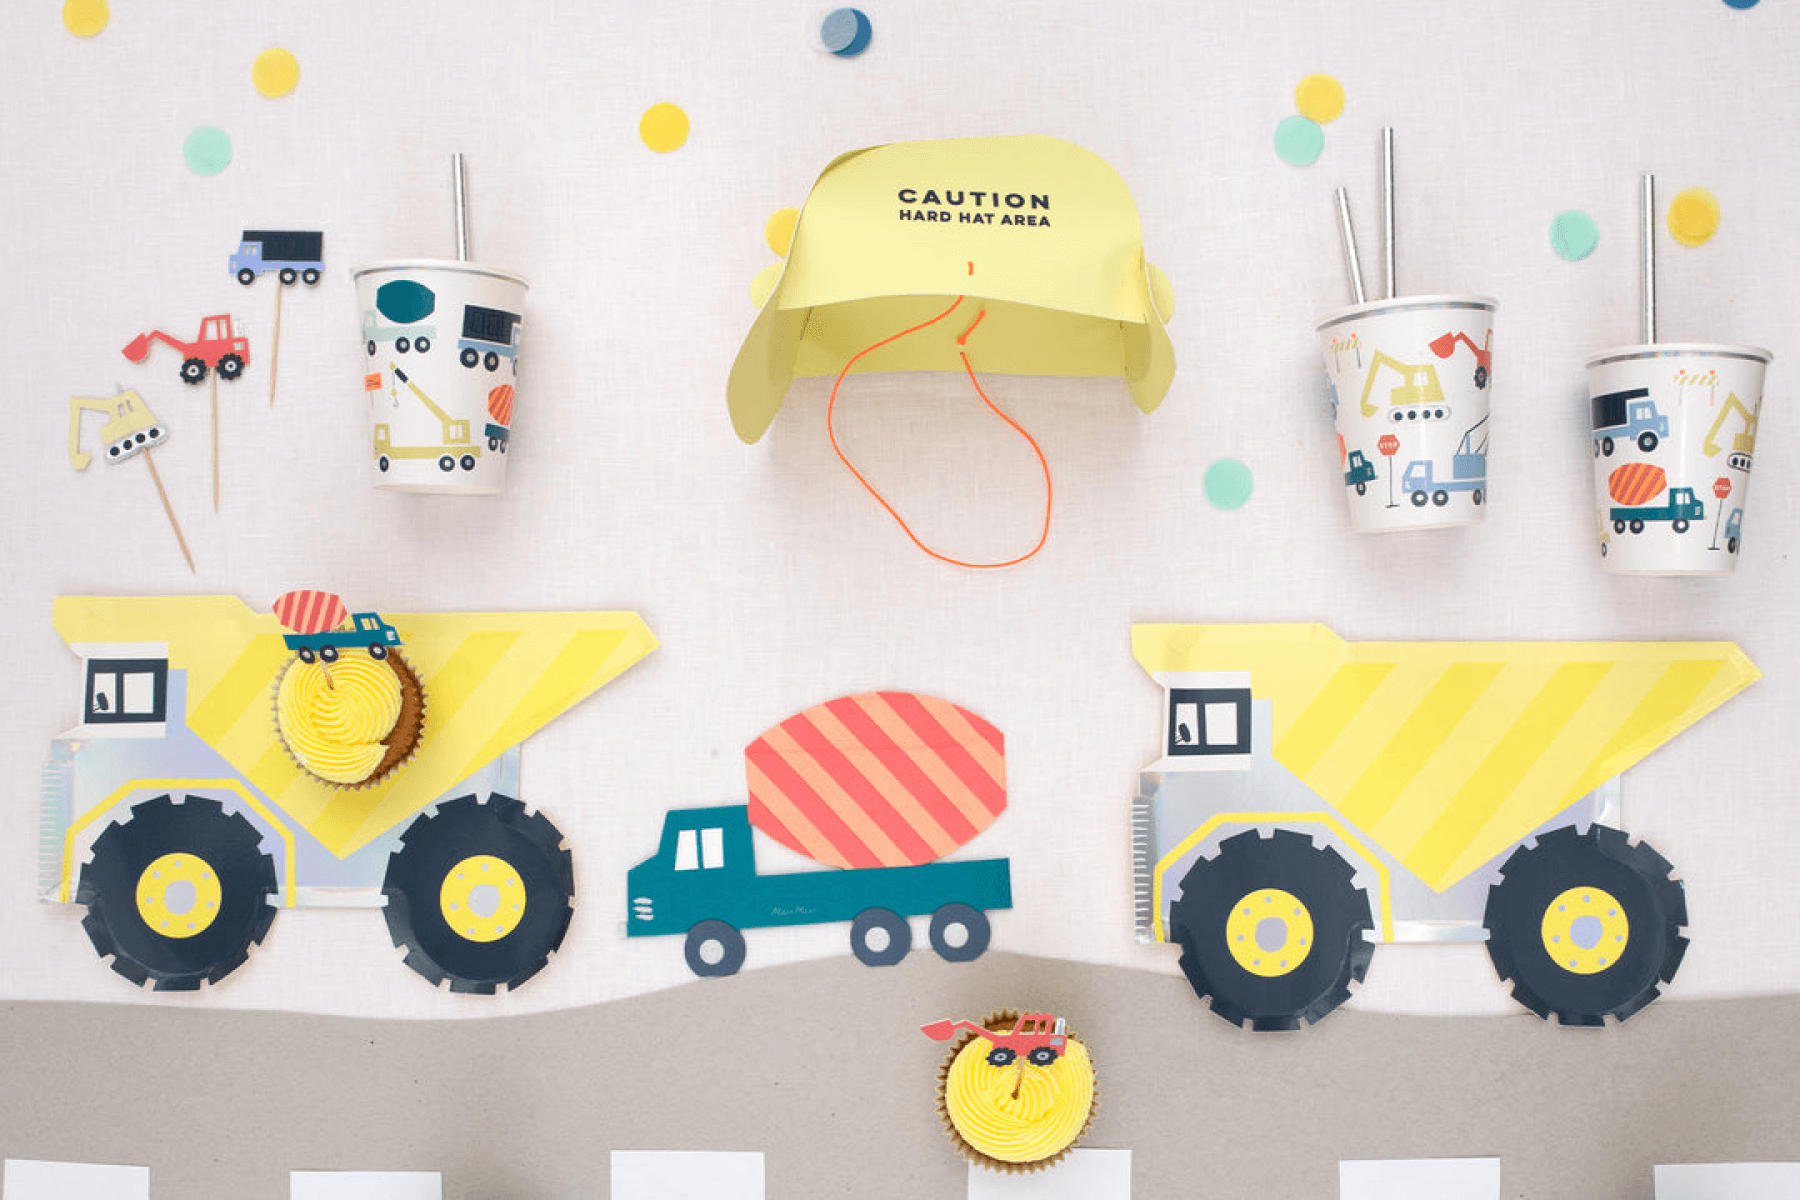 Construction site-themed birthday party supplies.